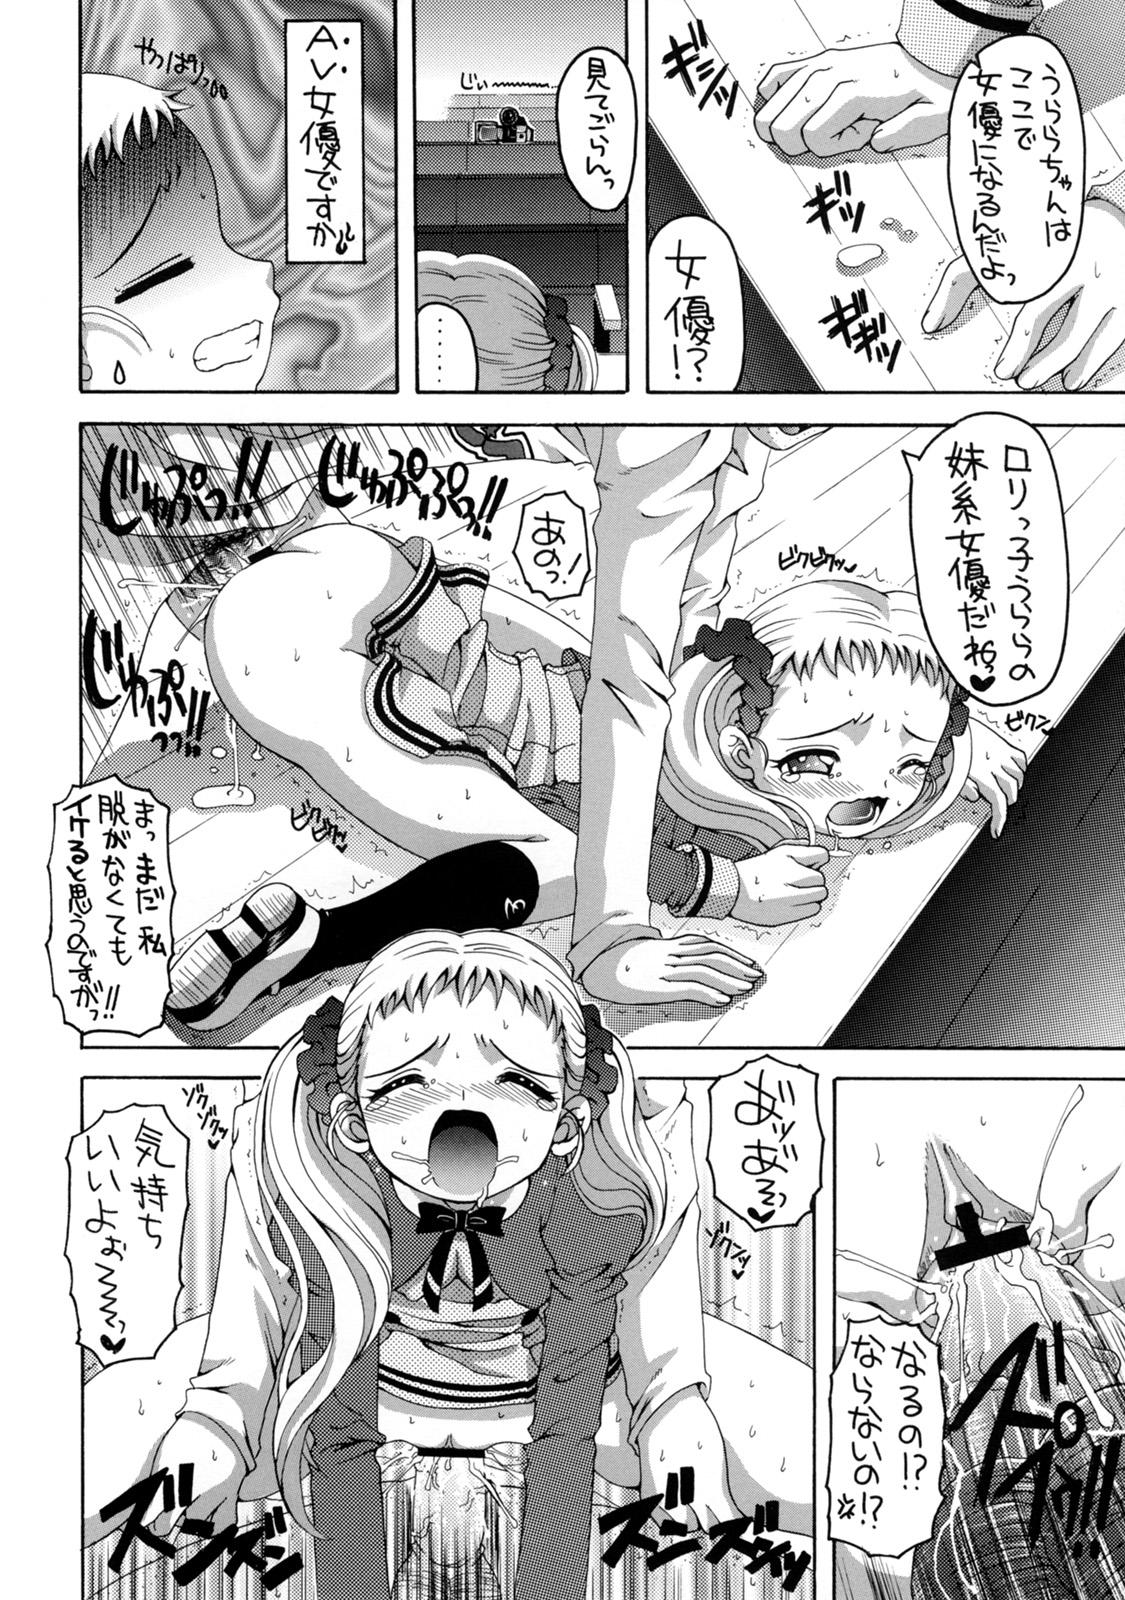 Anime Yes! Five 3 - Pretty cure Yes precure 5 Coroa - Page 11